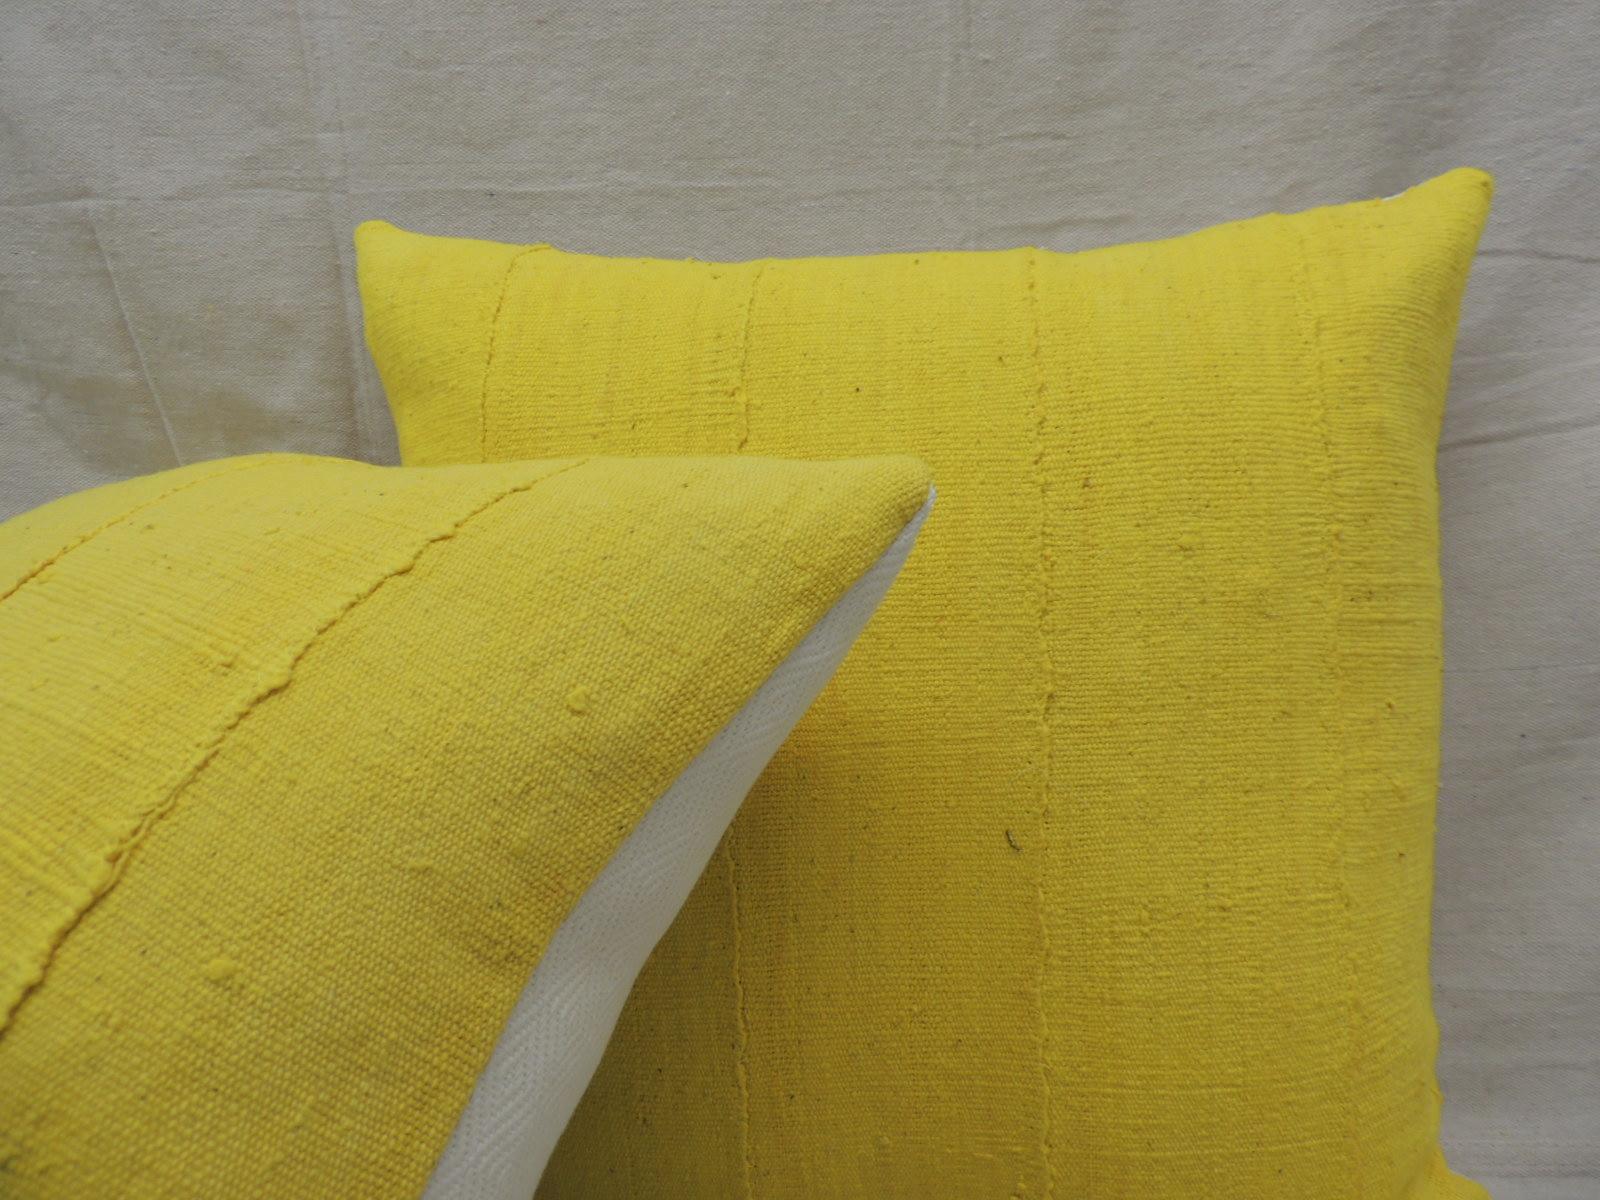 Malian Pair of Vintage Canary Yellow African Mud Cloth Square Decorative Pillows